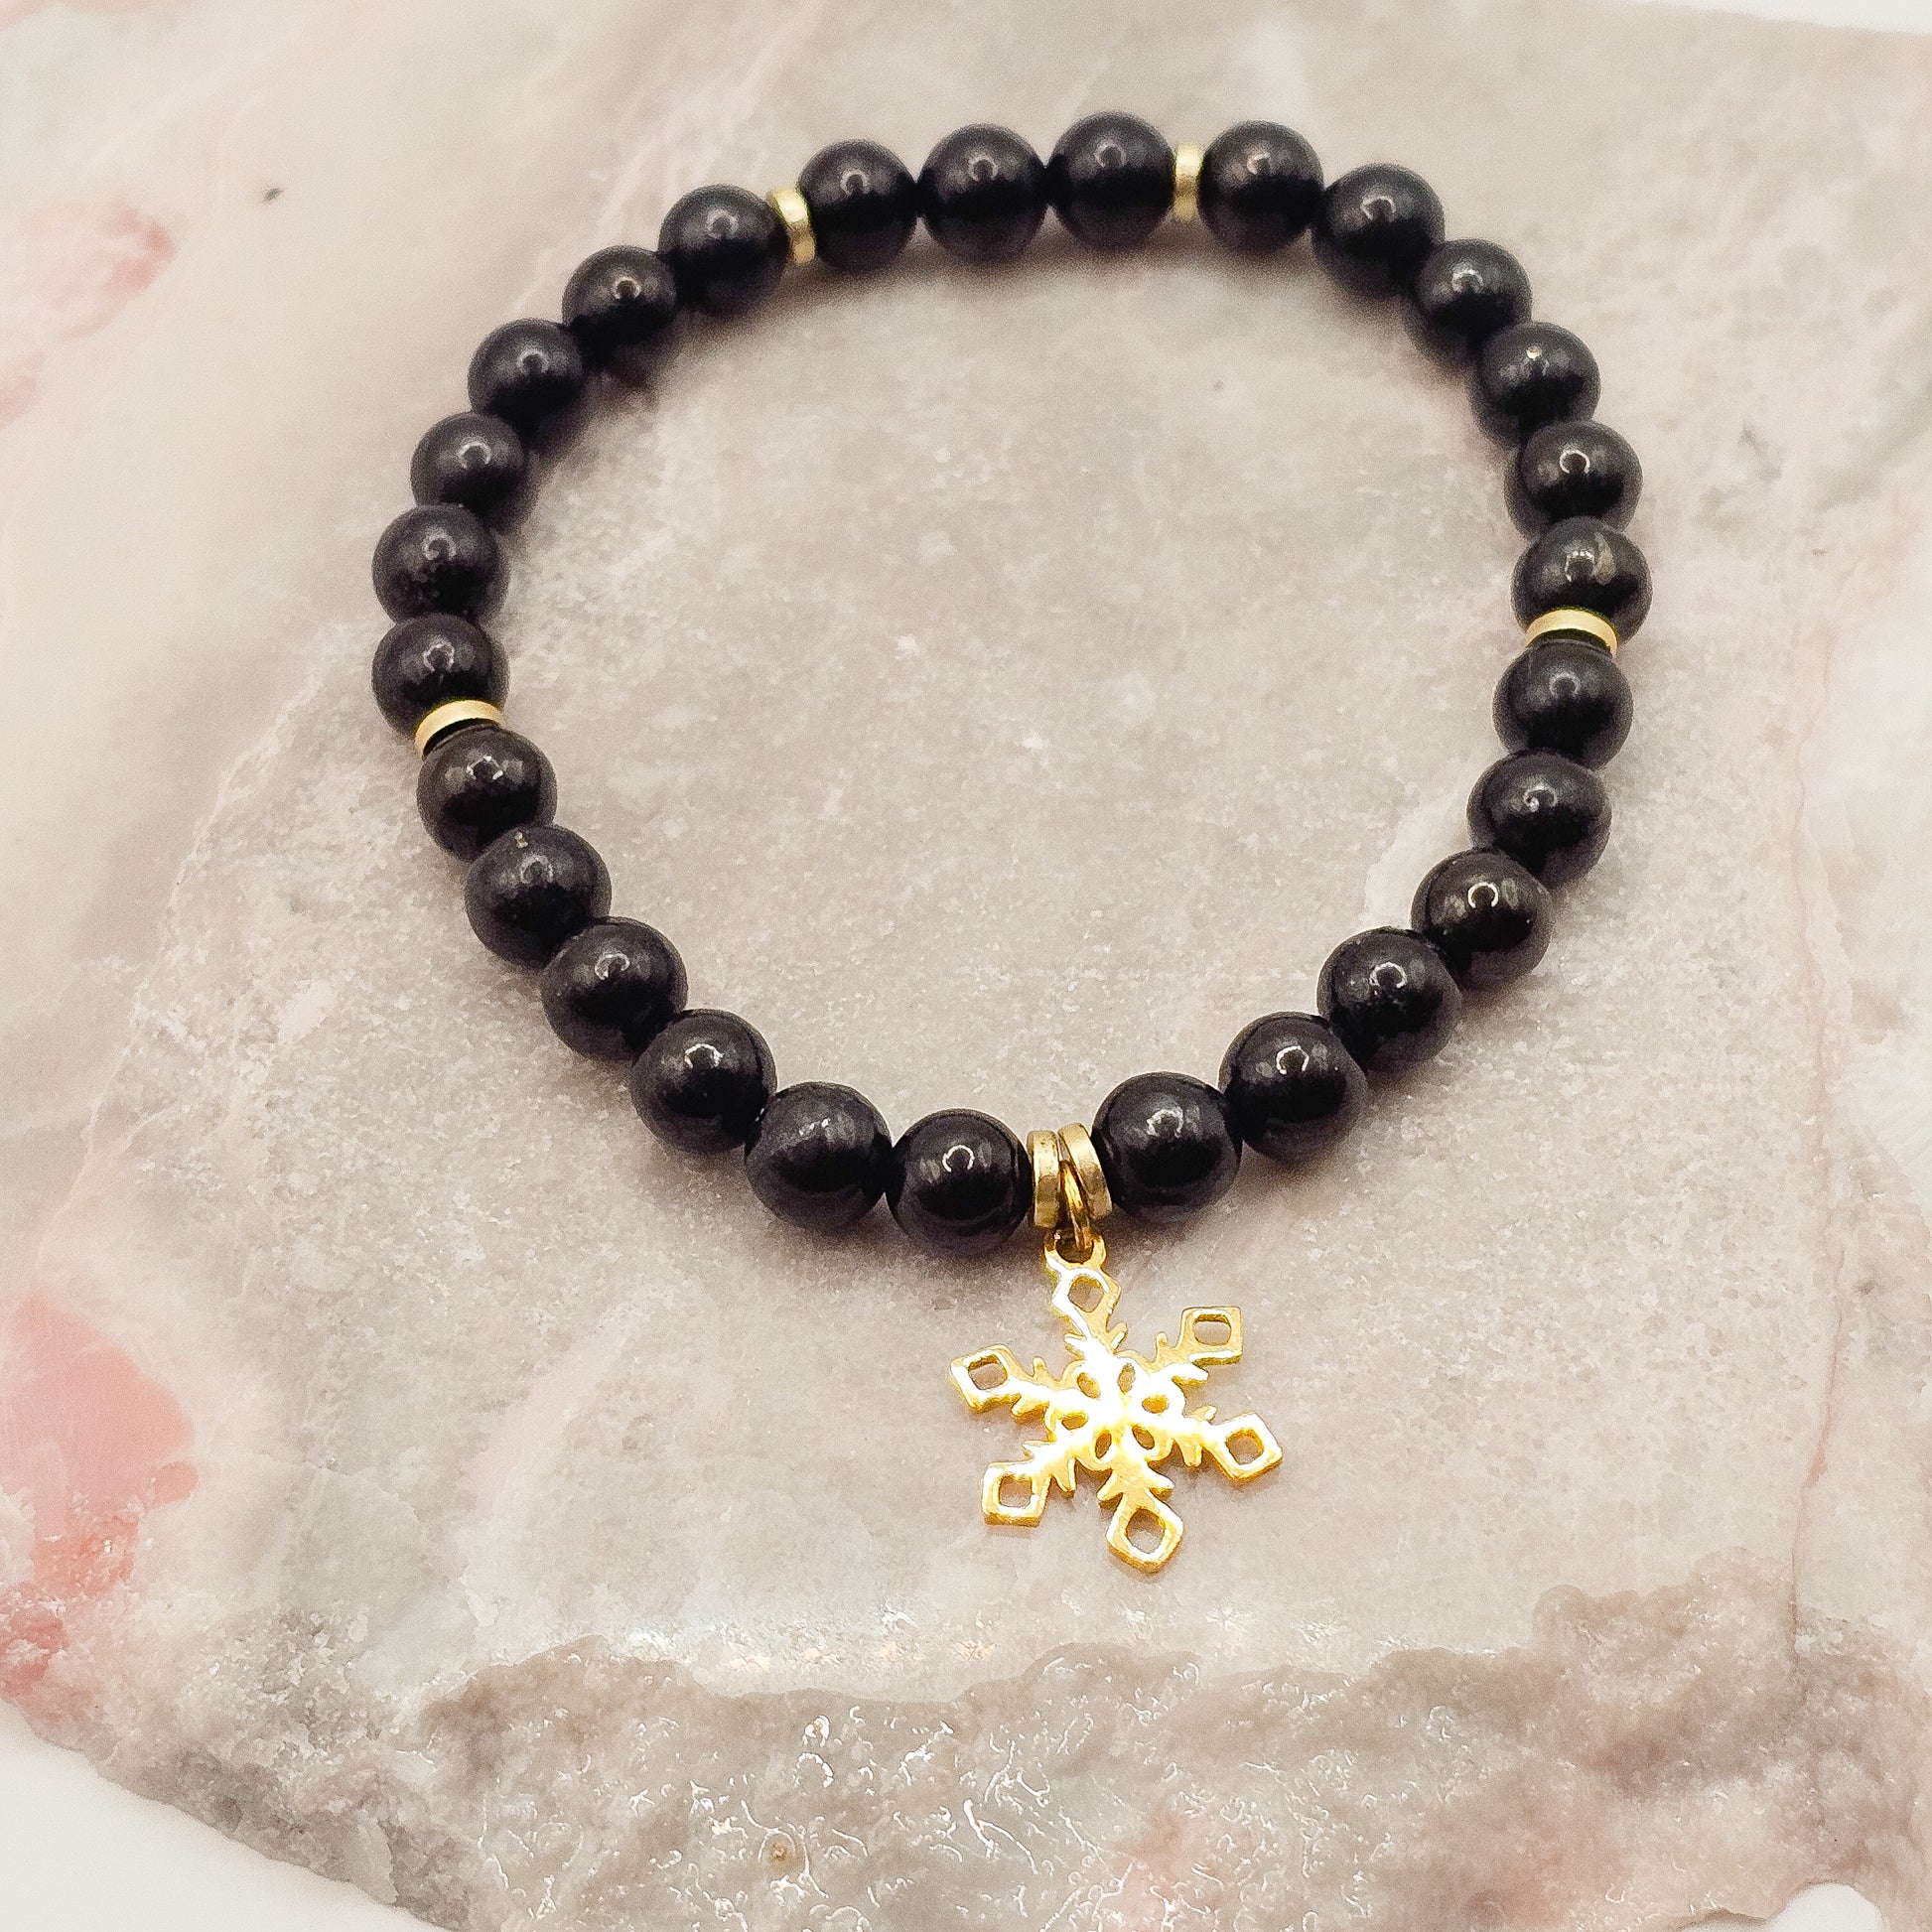 Shungite and Hematite stretch bracelet with golden stainless steel snowflake charm | When worn, Shungite is said to emit pain-killing properties and helps fight fatigue.